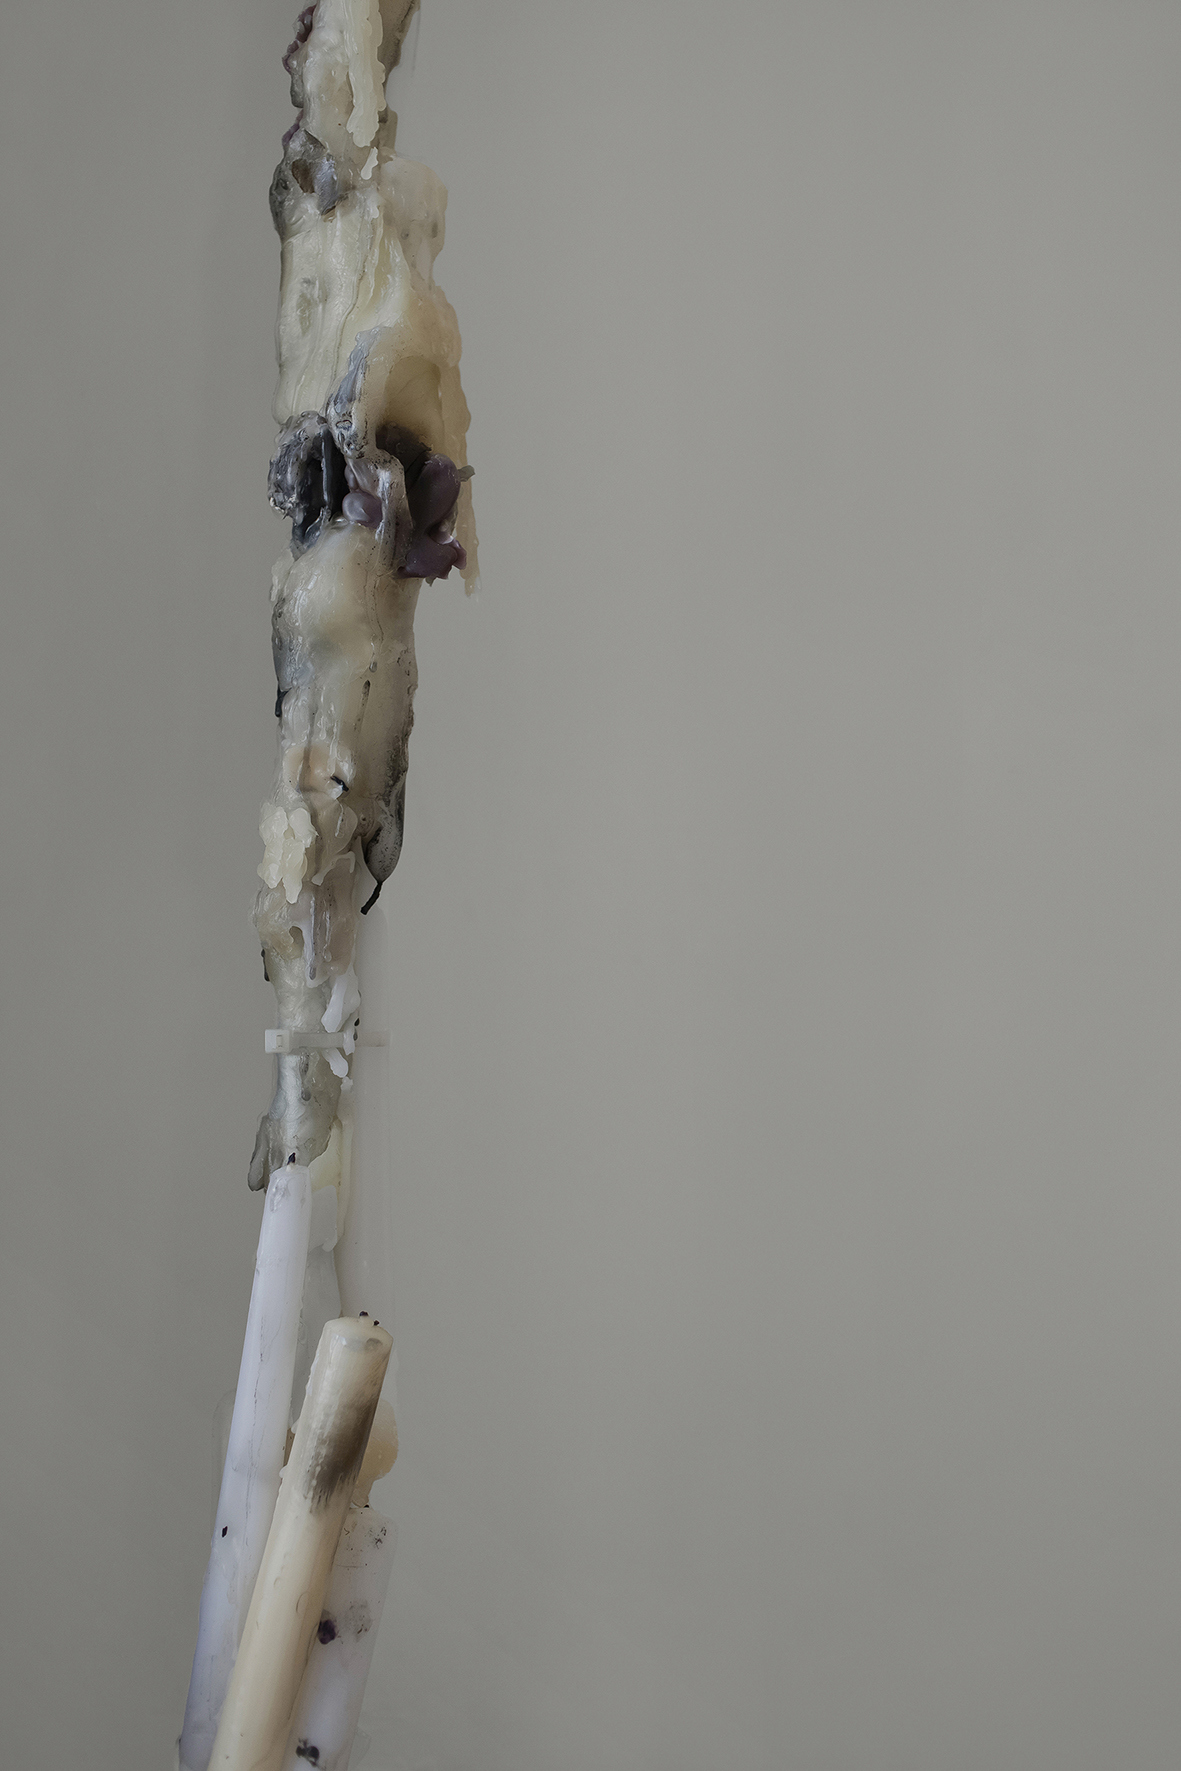 Intention Ghosts (retitled), 2021/24, series, candle remnants, wax, armatures, various materials, dimensions variable (detail)